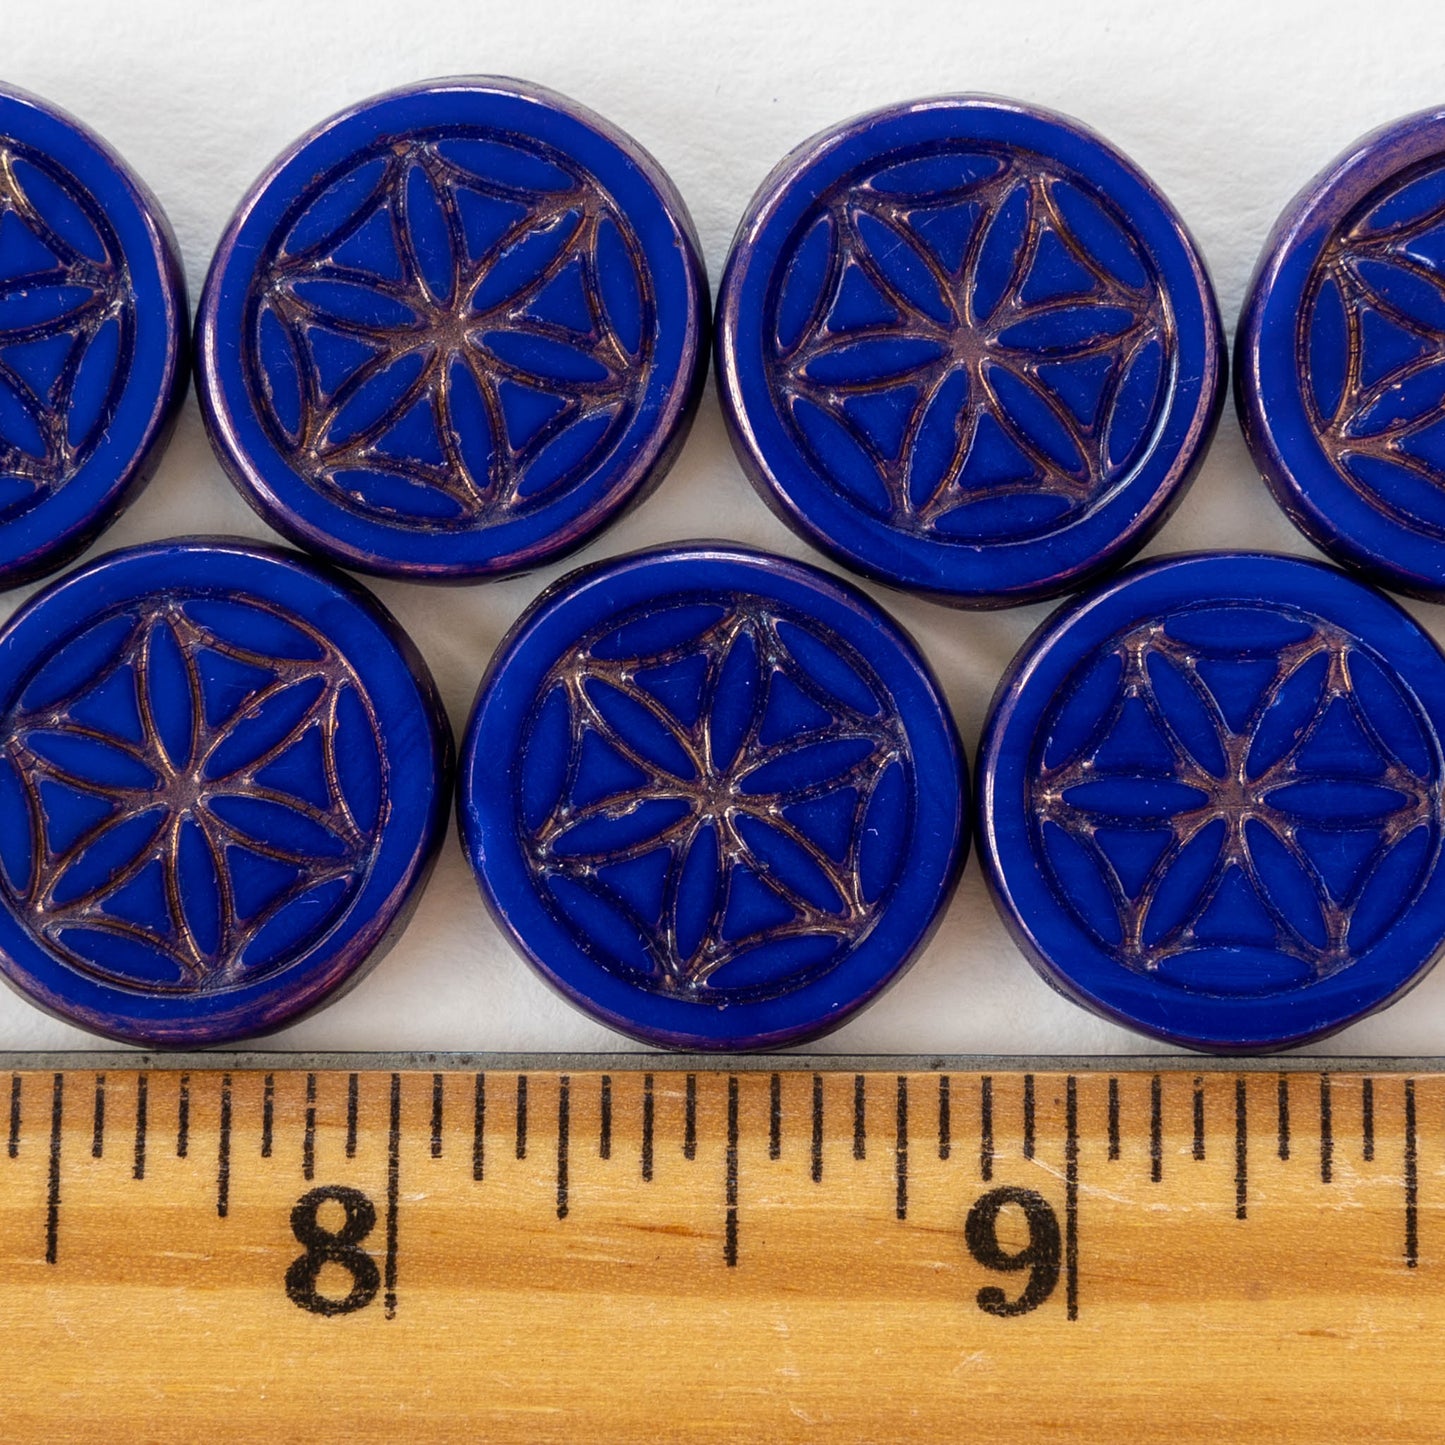 19mm Flower of Life Coin Bead - Blue with Gold Wash - Choose Amount